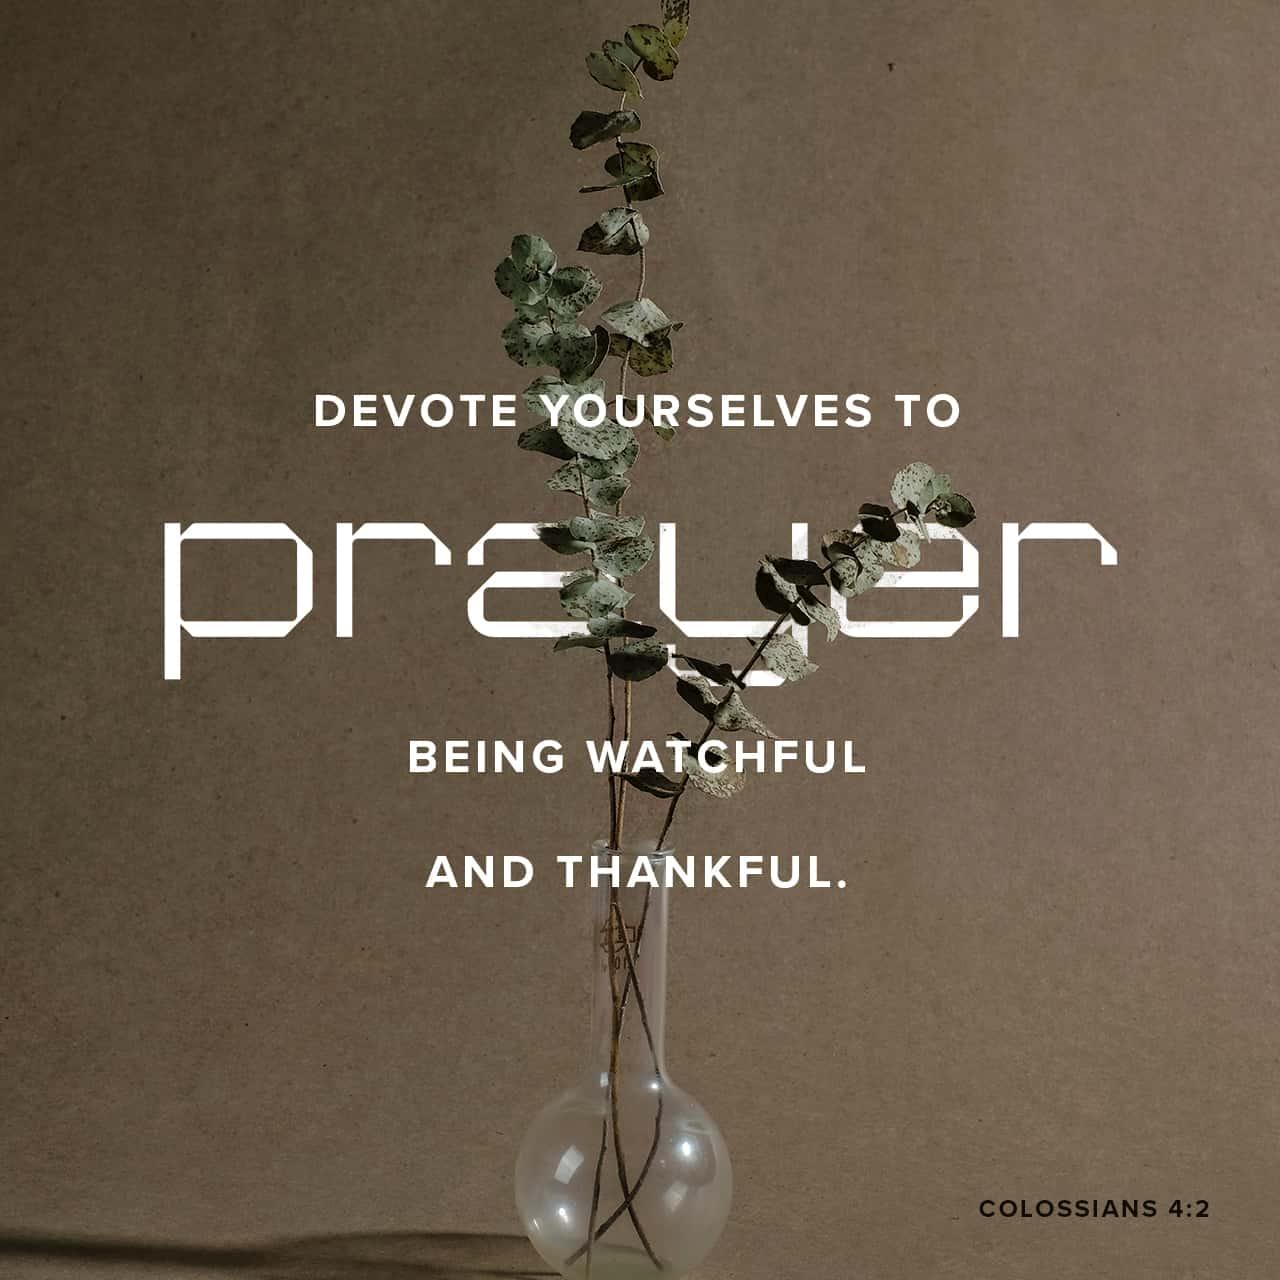 Bible Verse of the Day - day 91 - image 56516 (Colossians 4:2)